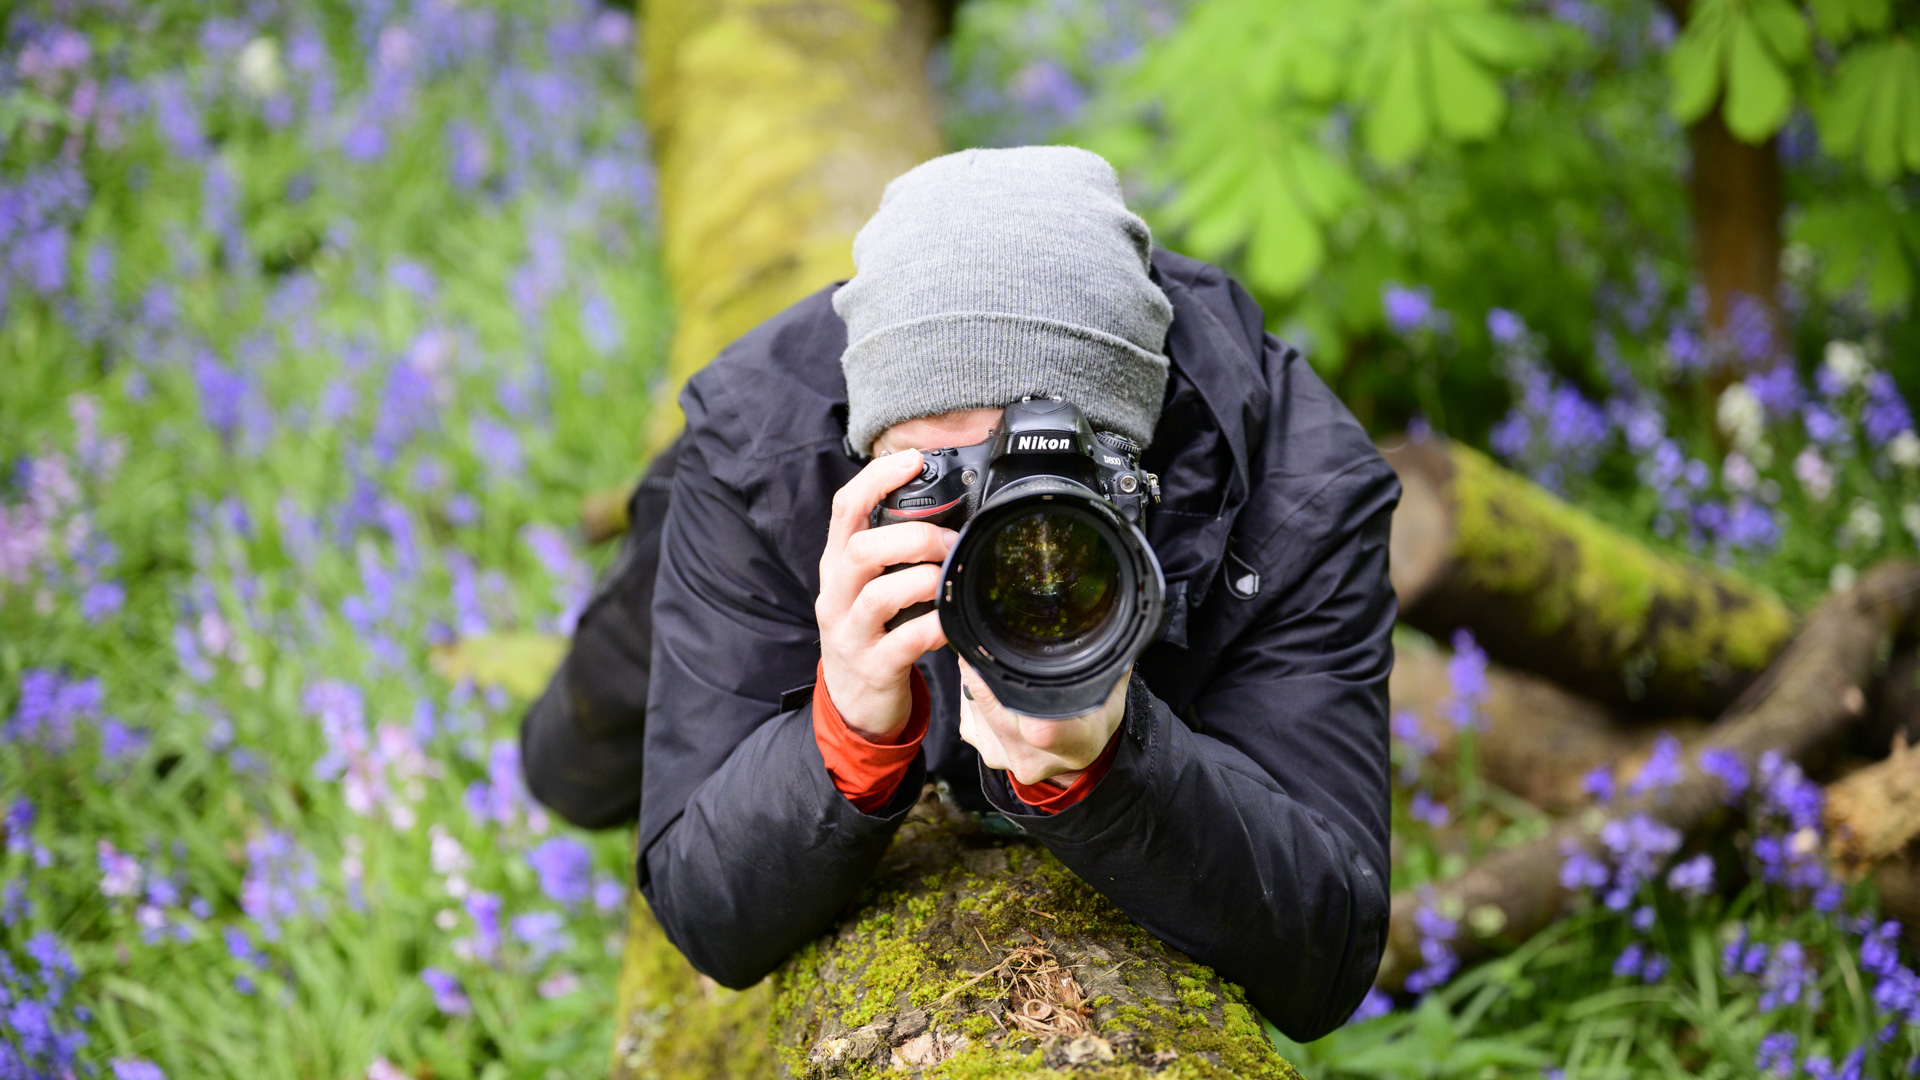 Photographer on a tree trunk surrounded by bluebells holding a Nikon D800 DSLR camera